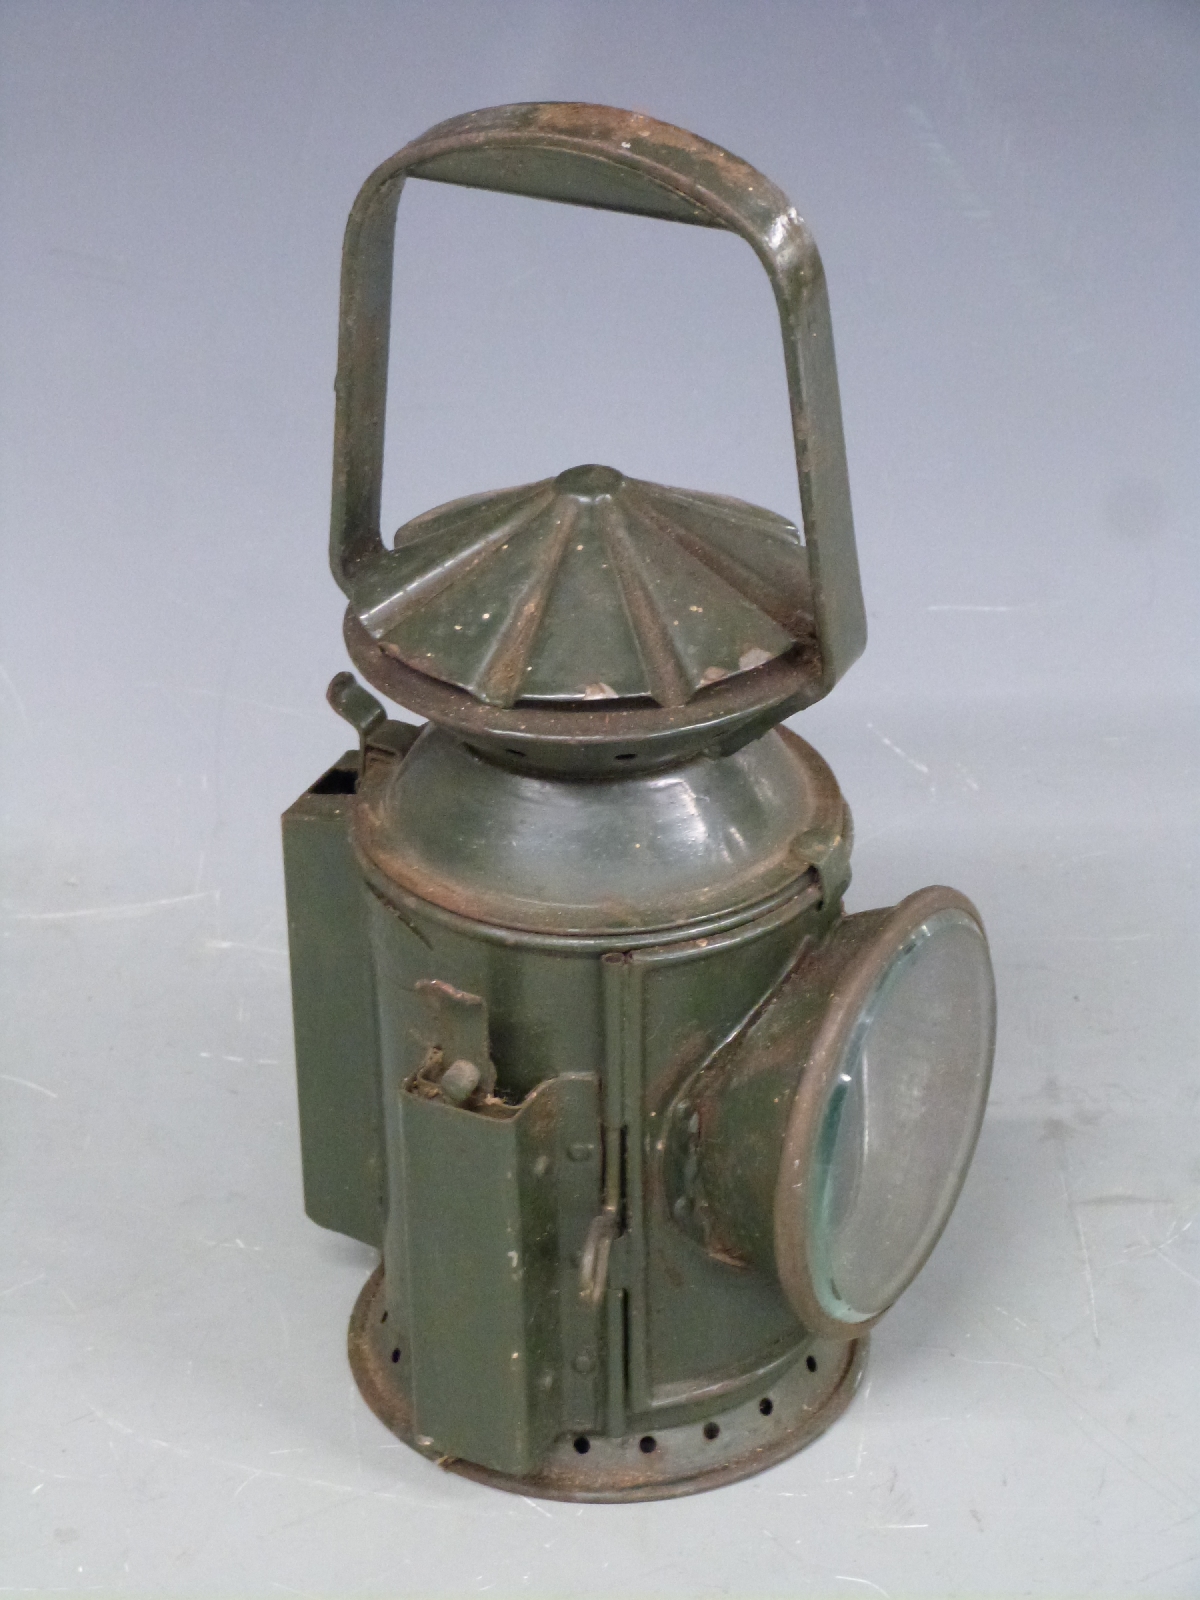 Military railway or similar tri colour hand lamp marked Wakefield 1945, height 30cm - Image 2 of 3